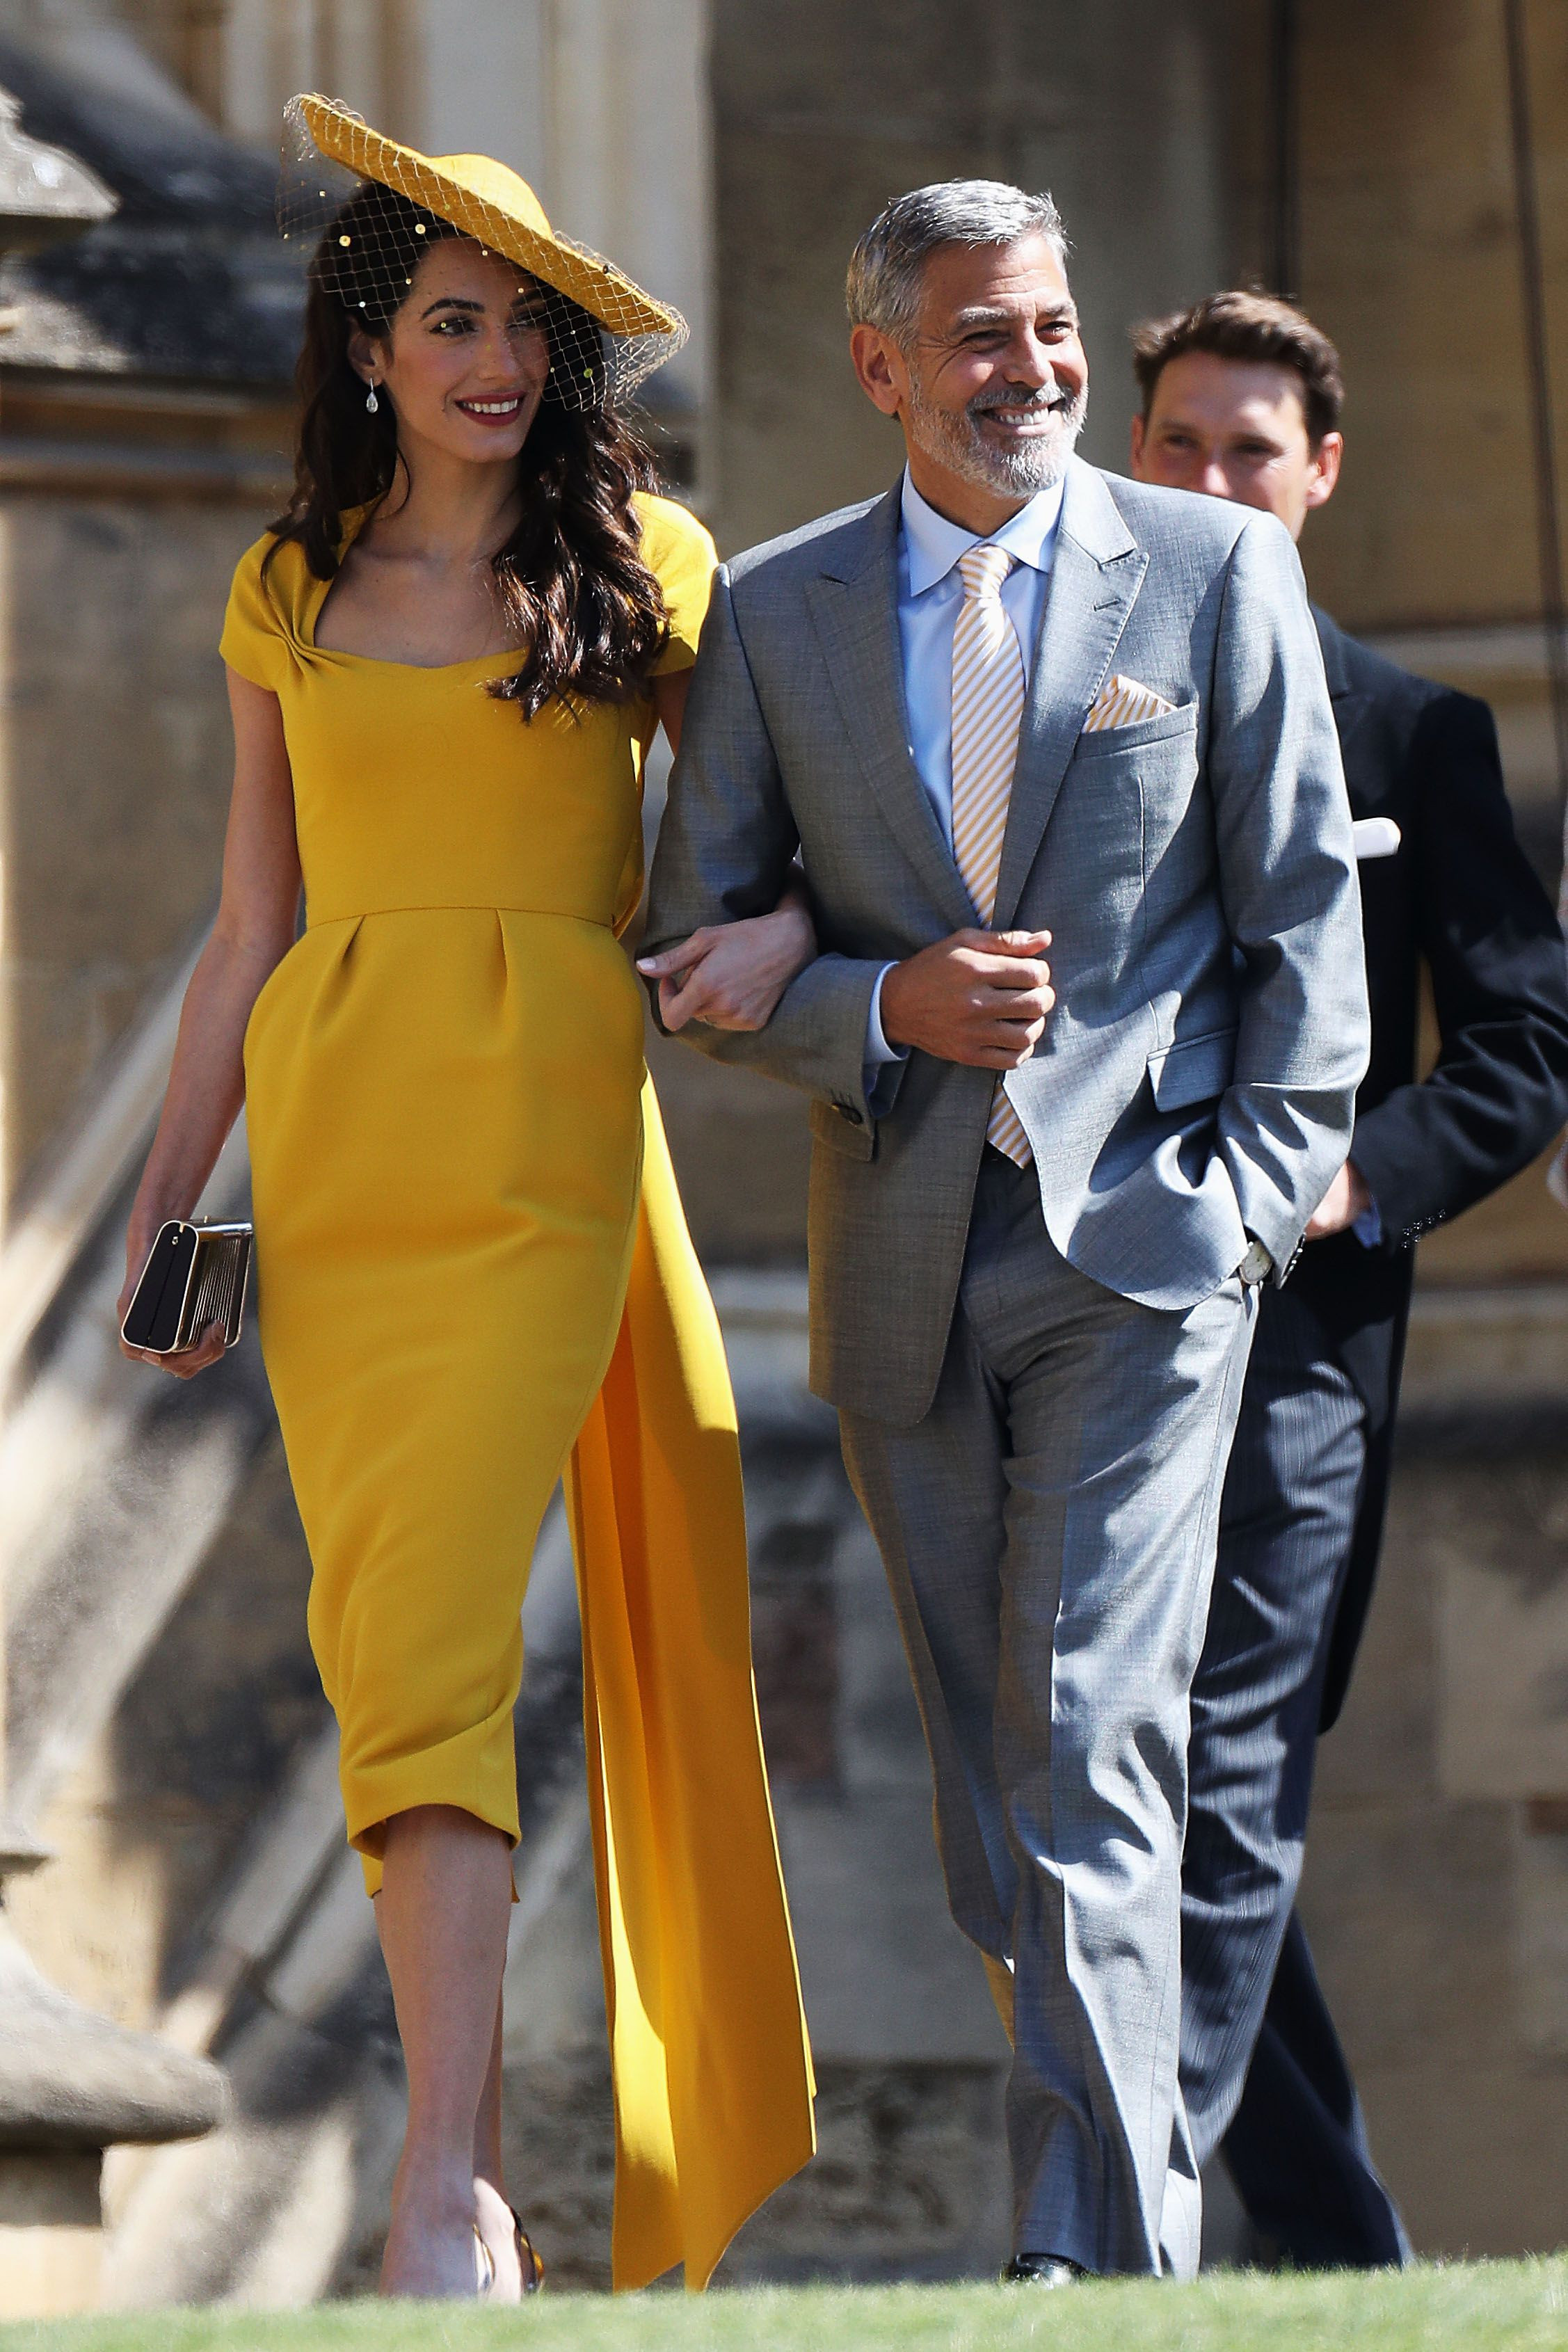 Amal Clooney Hochzeit
 Amal Clooney wears yellow to the royal wedding [Video]